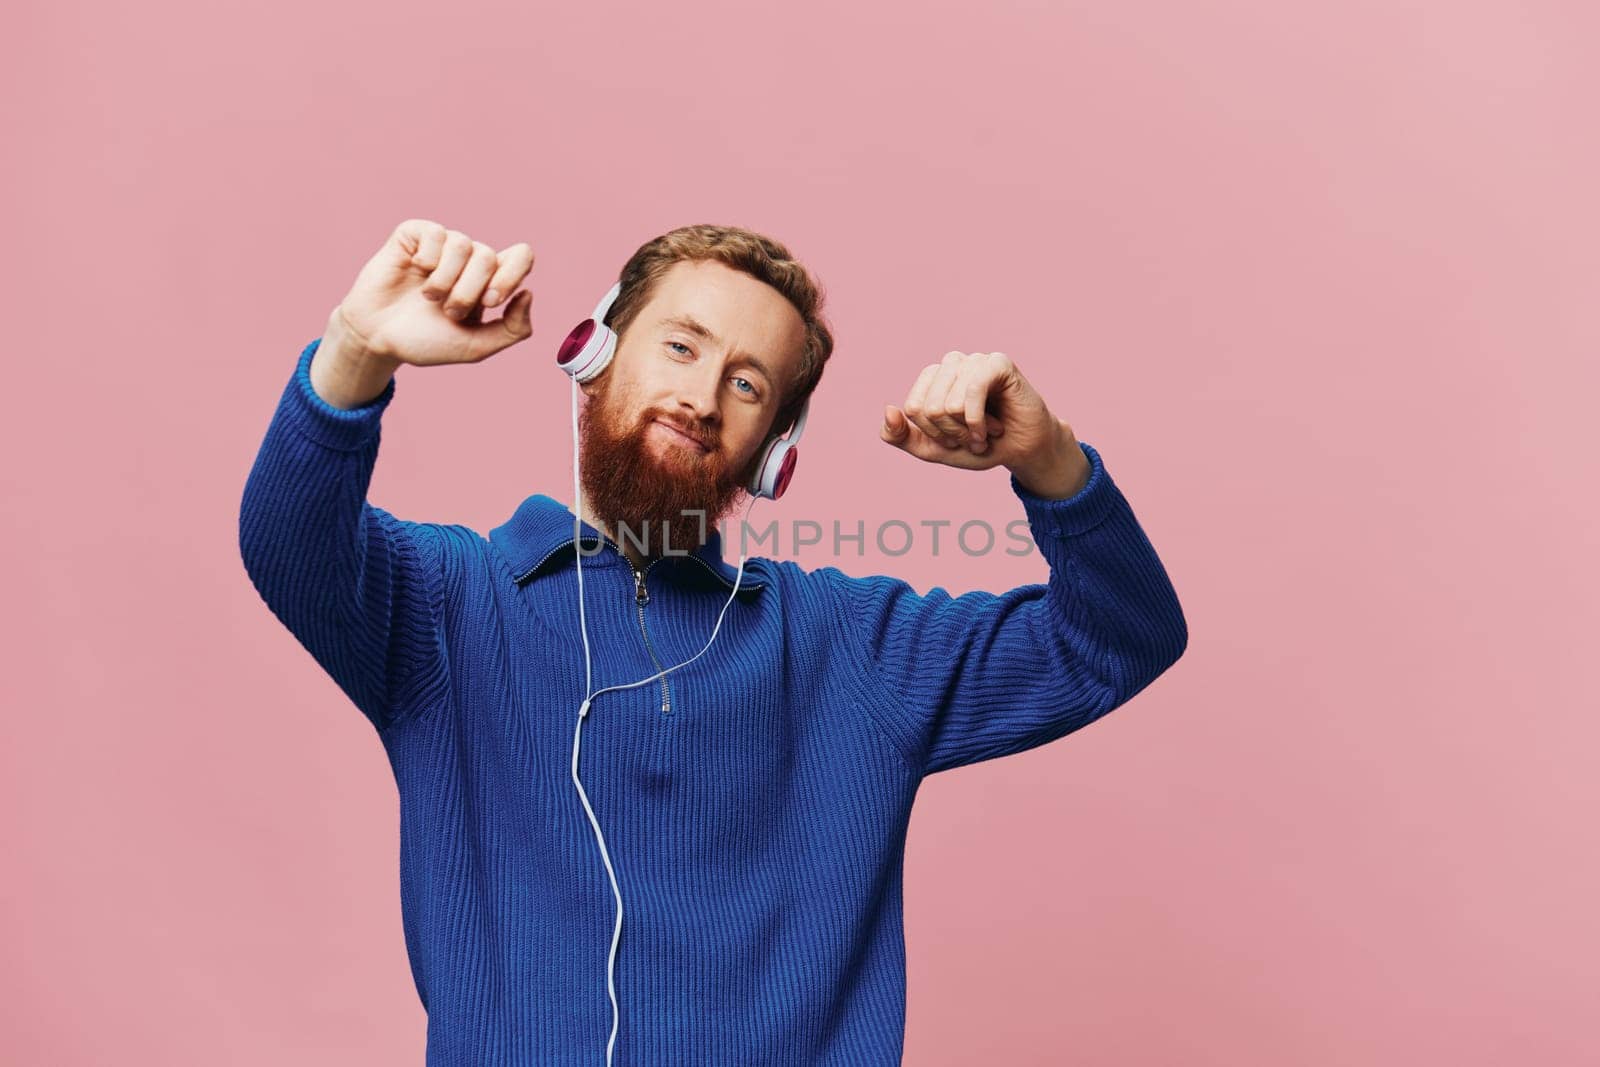 Portrait of a redheaded man wearing headphones smiling and dancing, listening to music on a pink background. A hipster with a beard. High quality photo